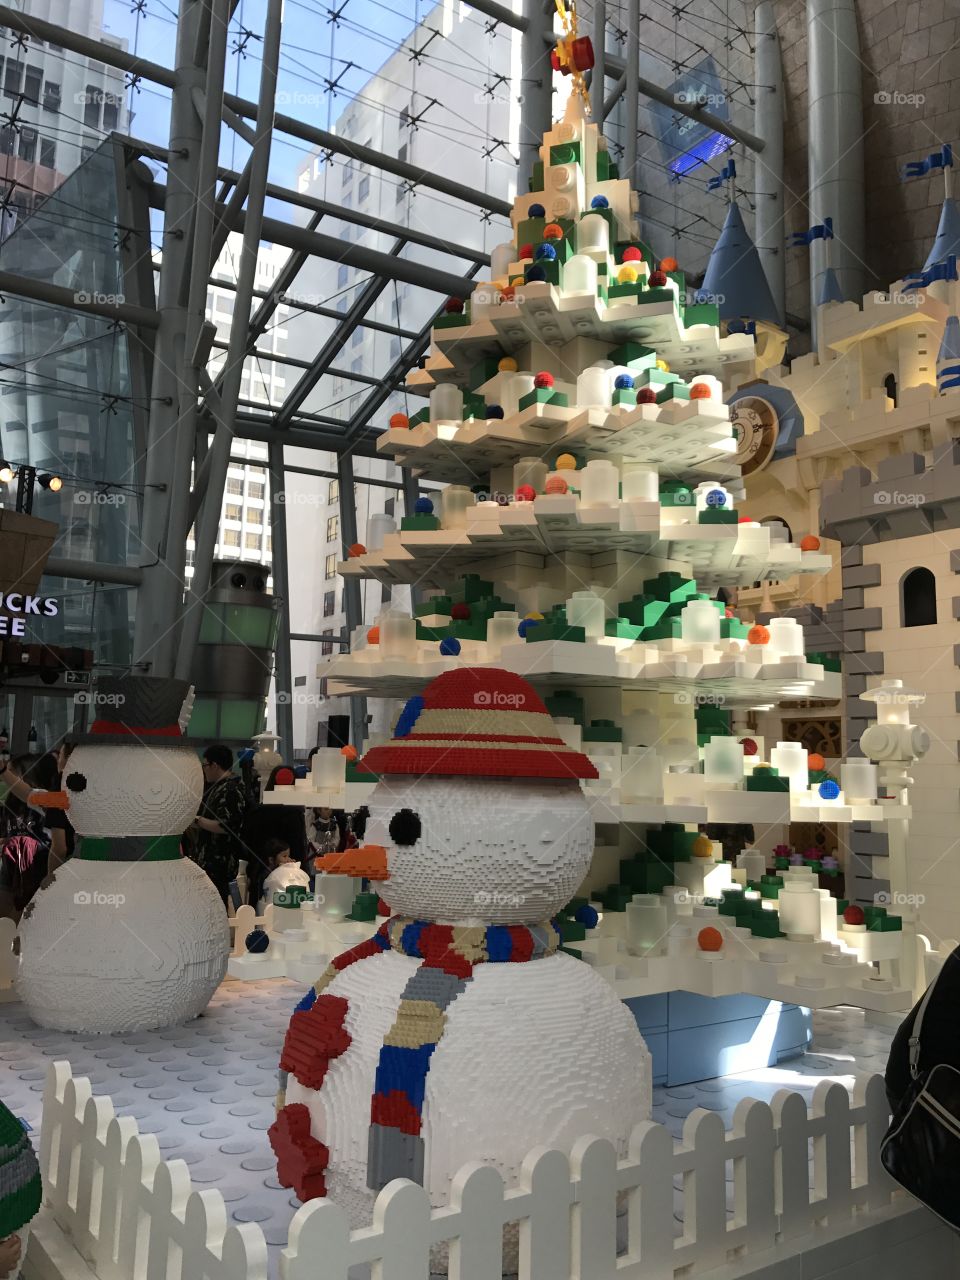 Holidays, shopping mall with Christmas decorations, Lego snowman, Christmas trees 